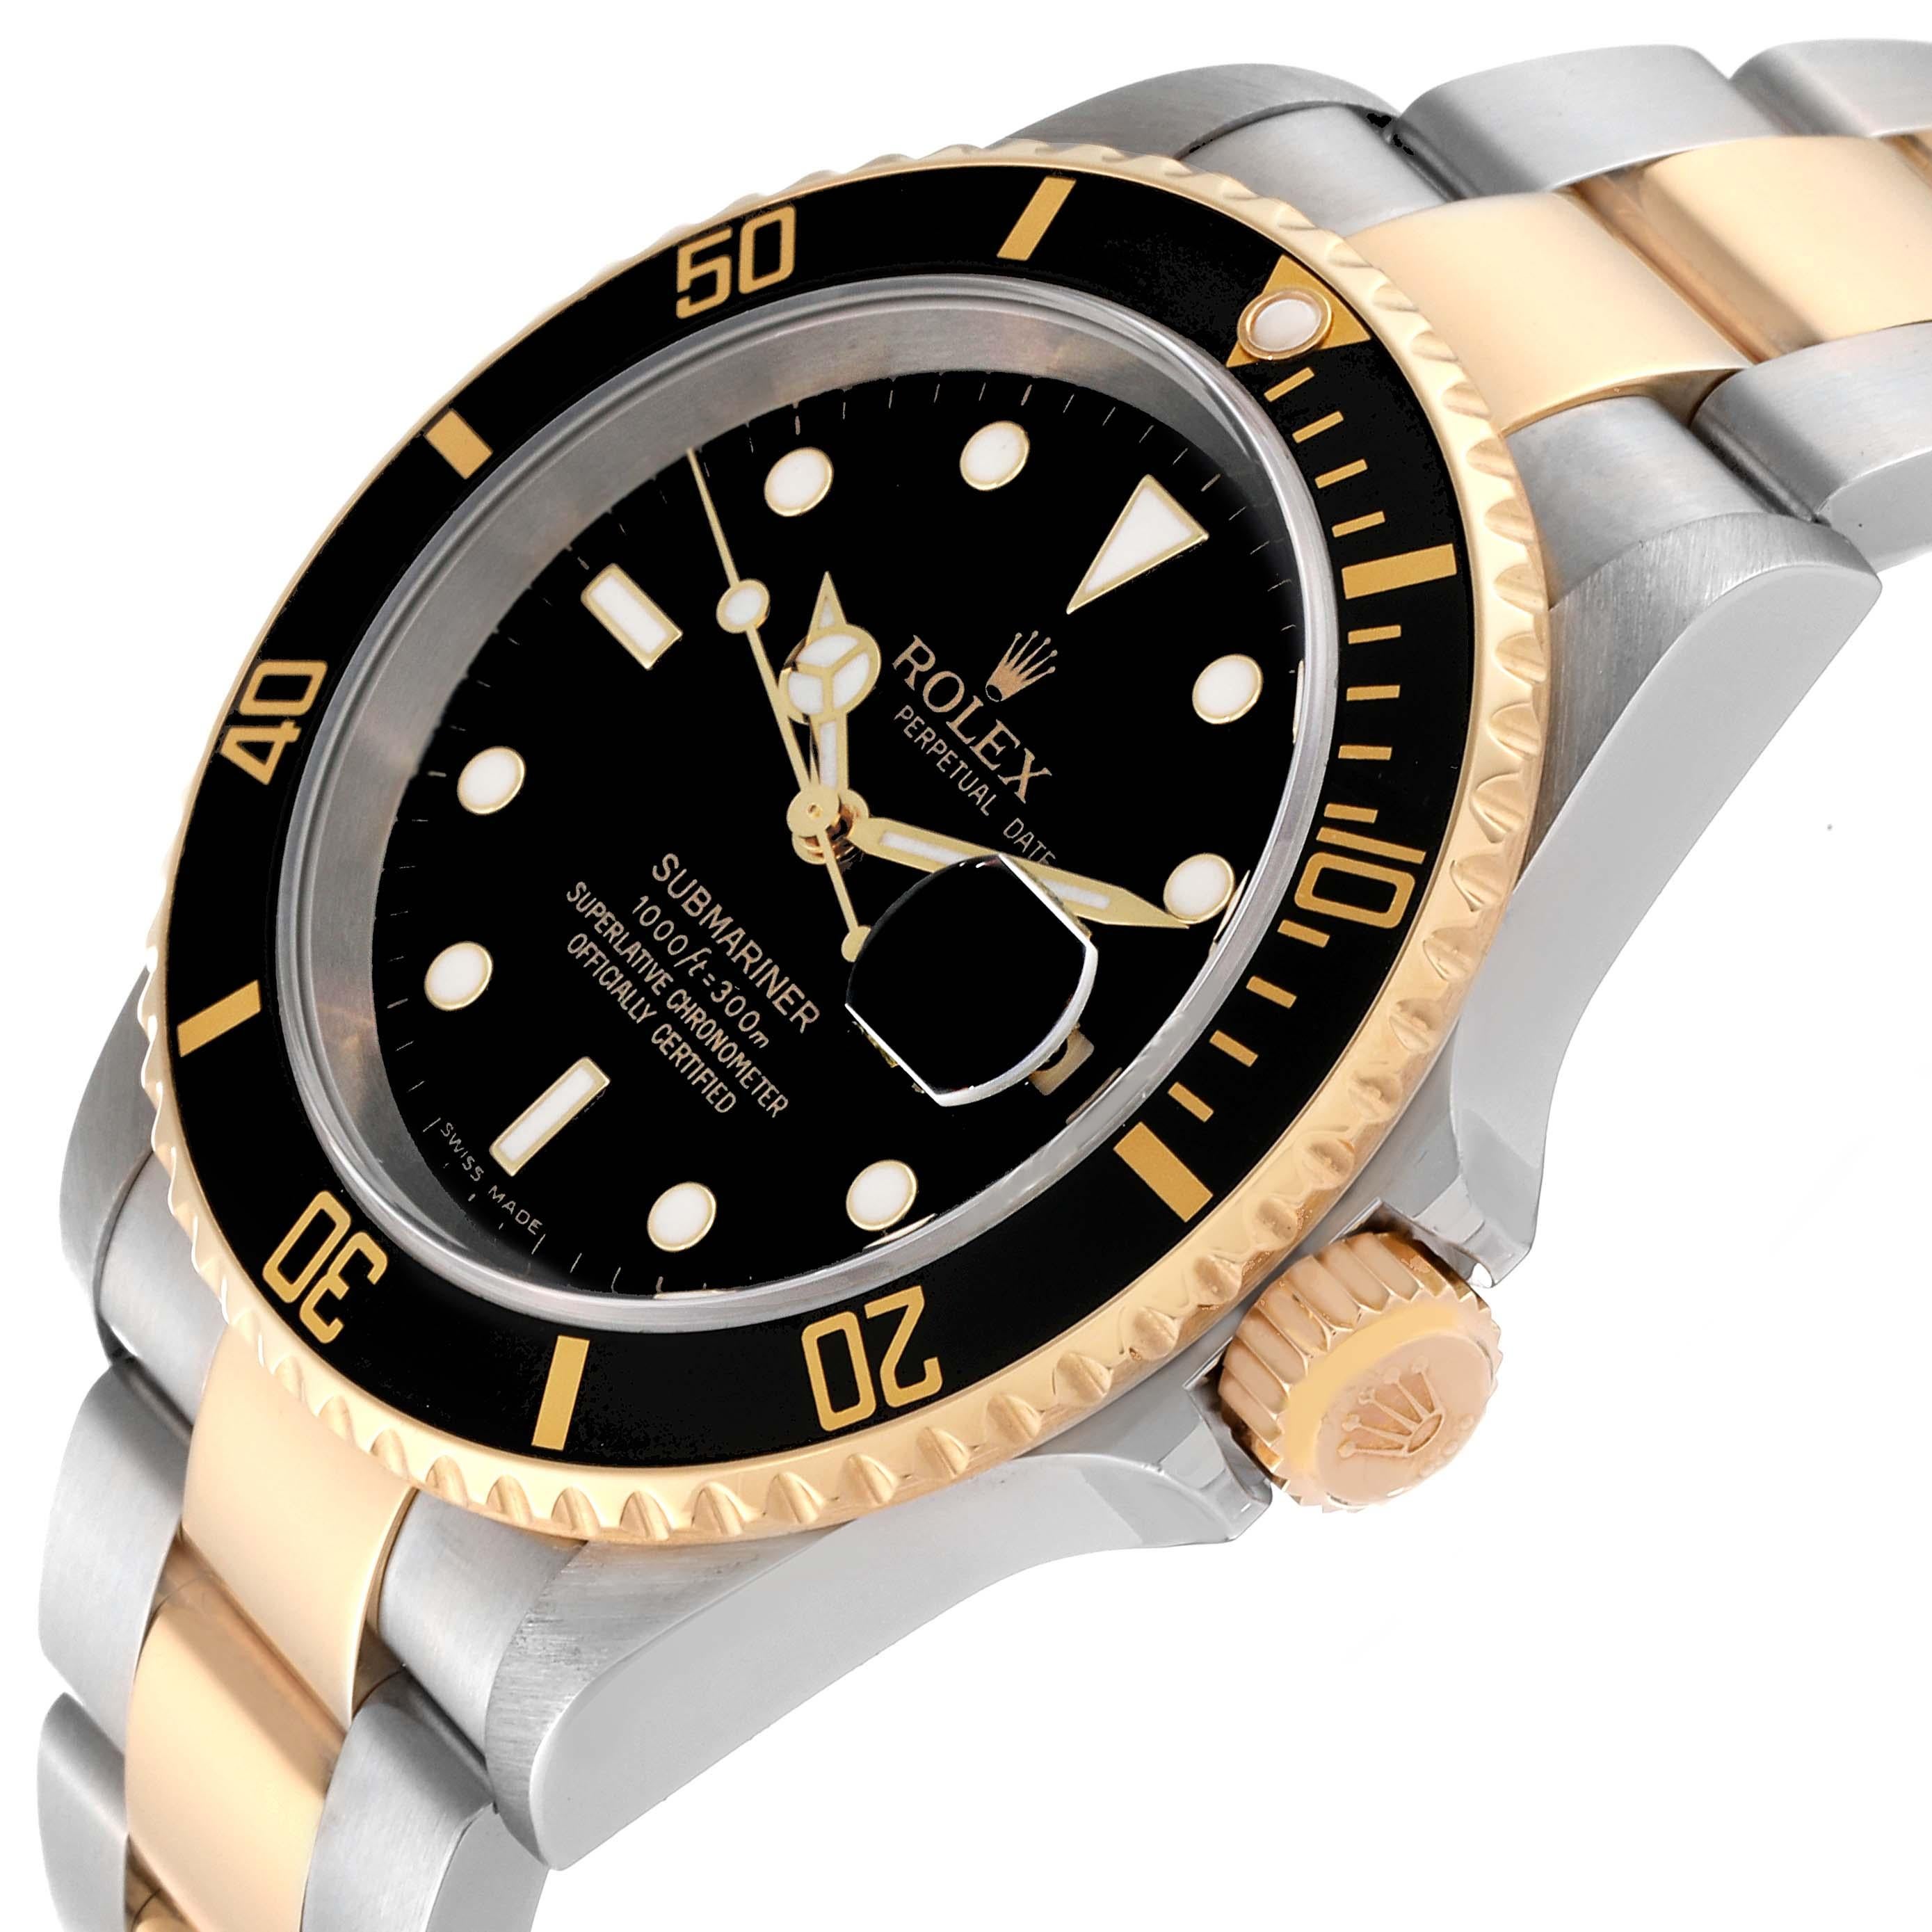 Rolex Submariner Steel Yellow Gold Black Dial Mens Watch 16613 Box Papers 1